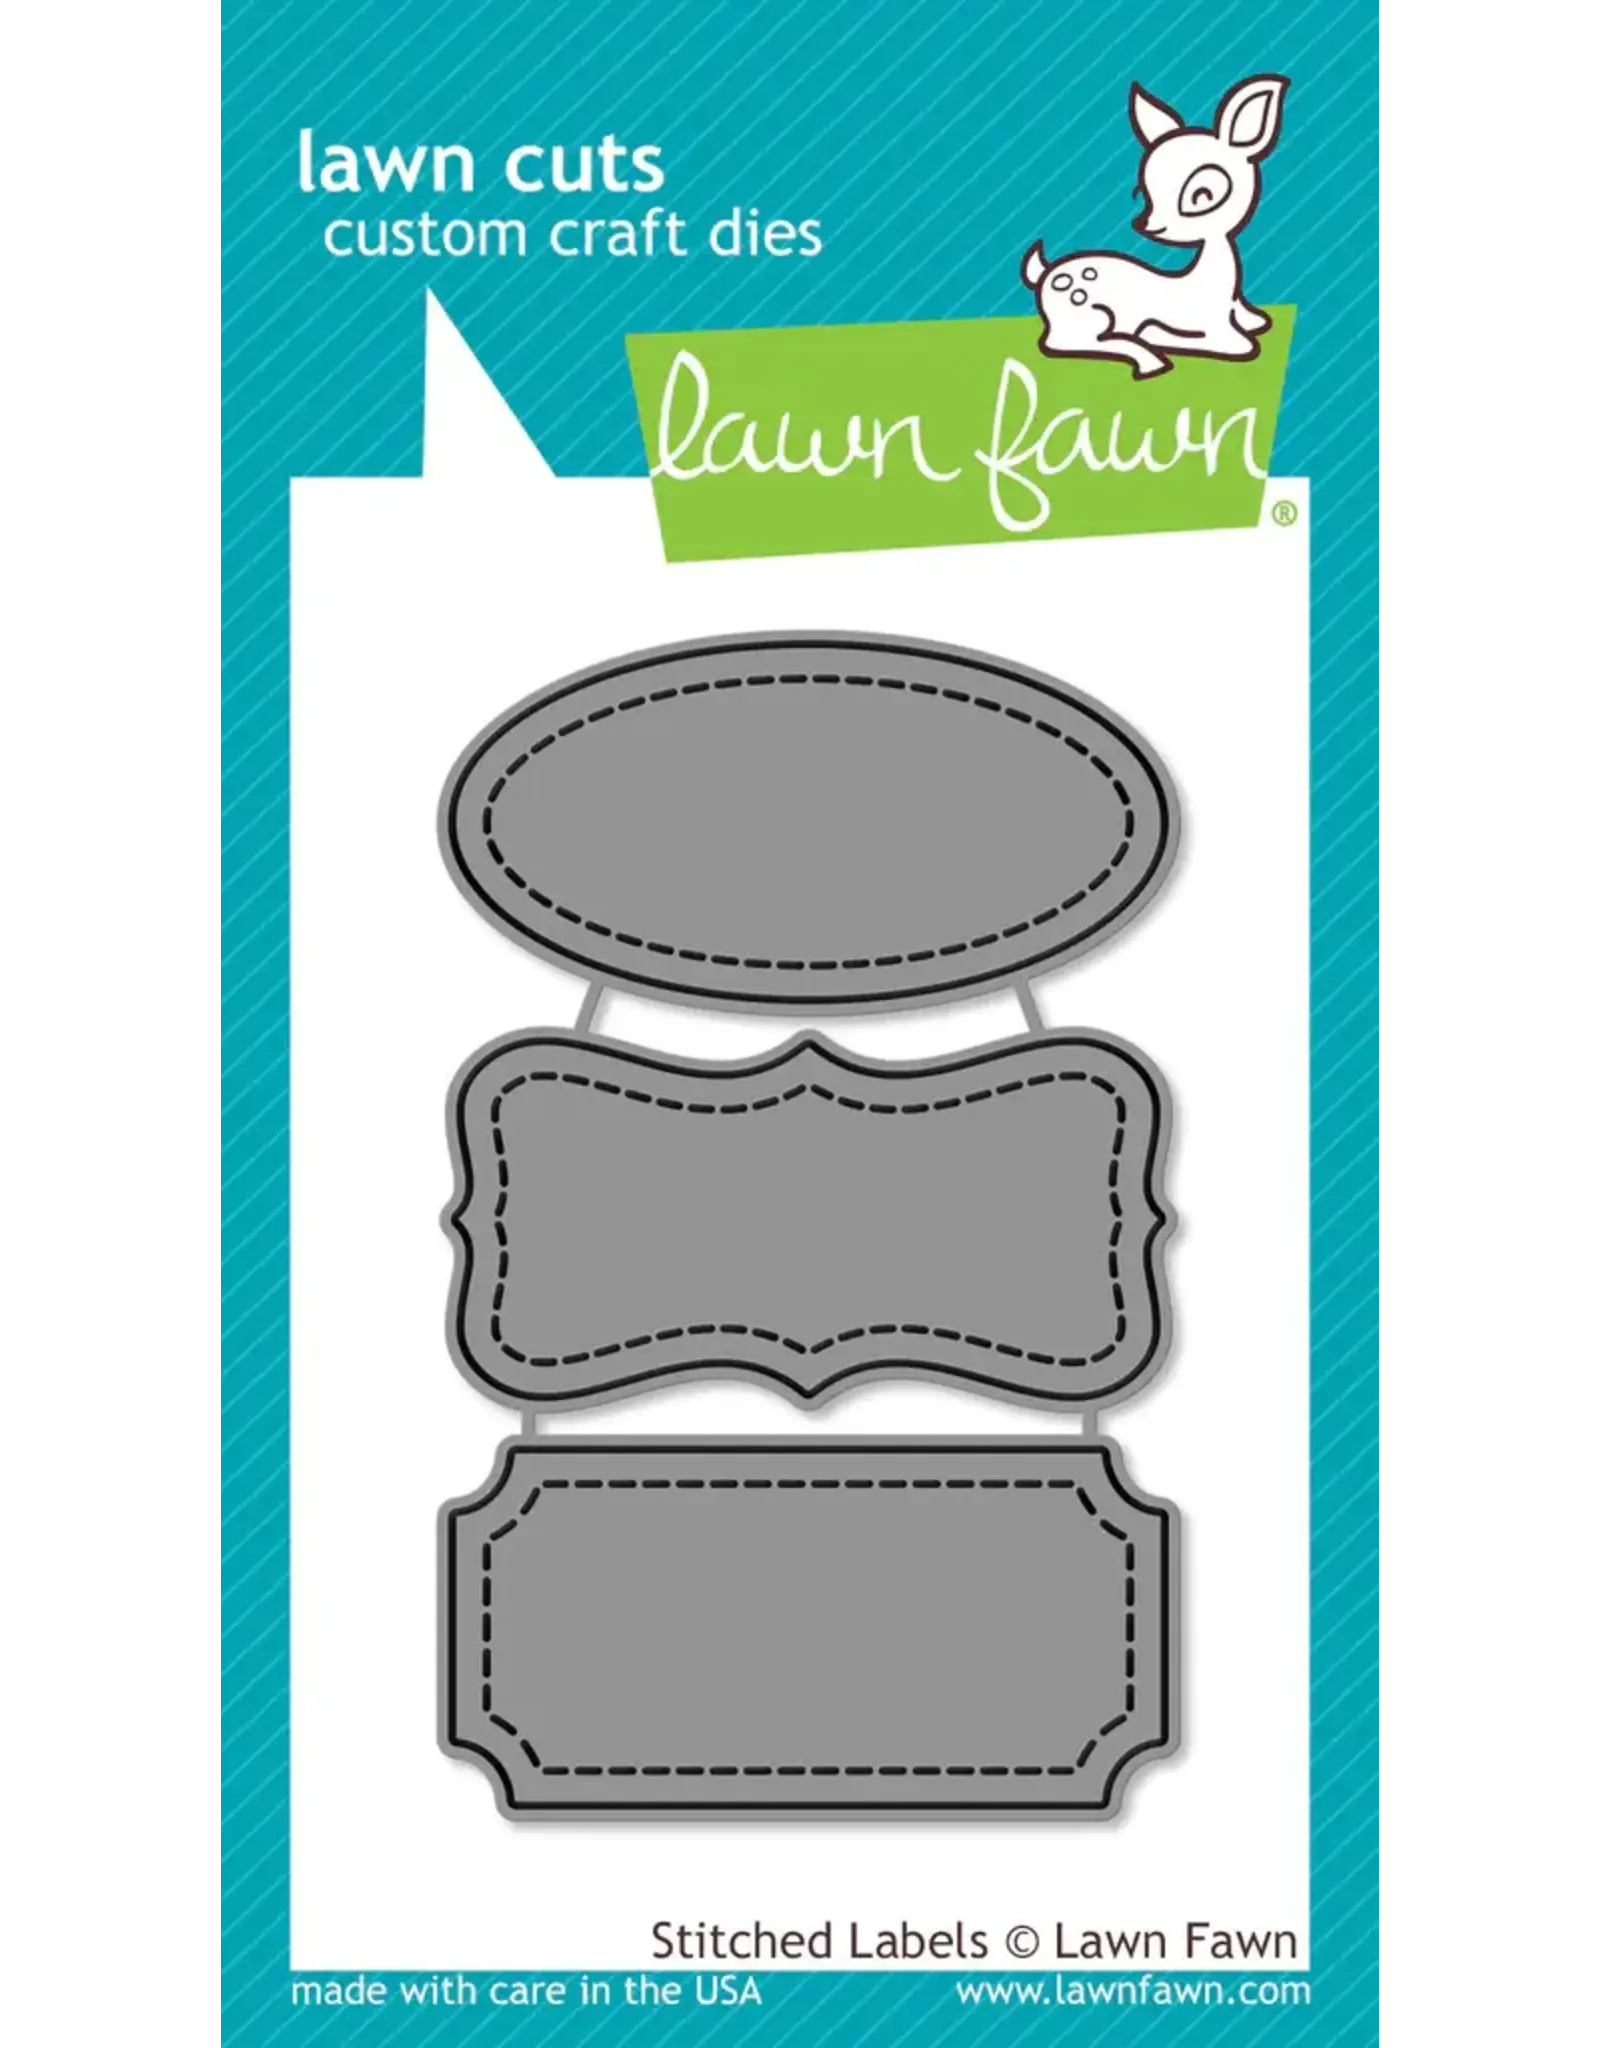 LAWN FAWN LAWN FAWN STITCHED LABELS DIE